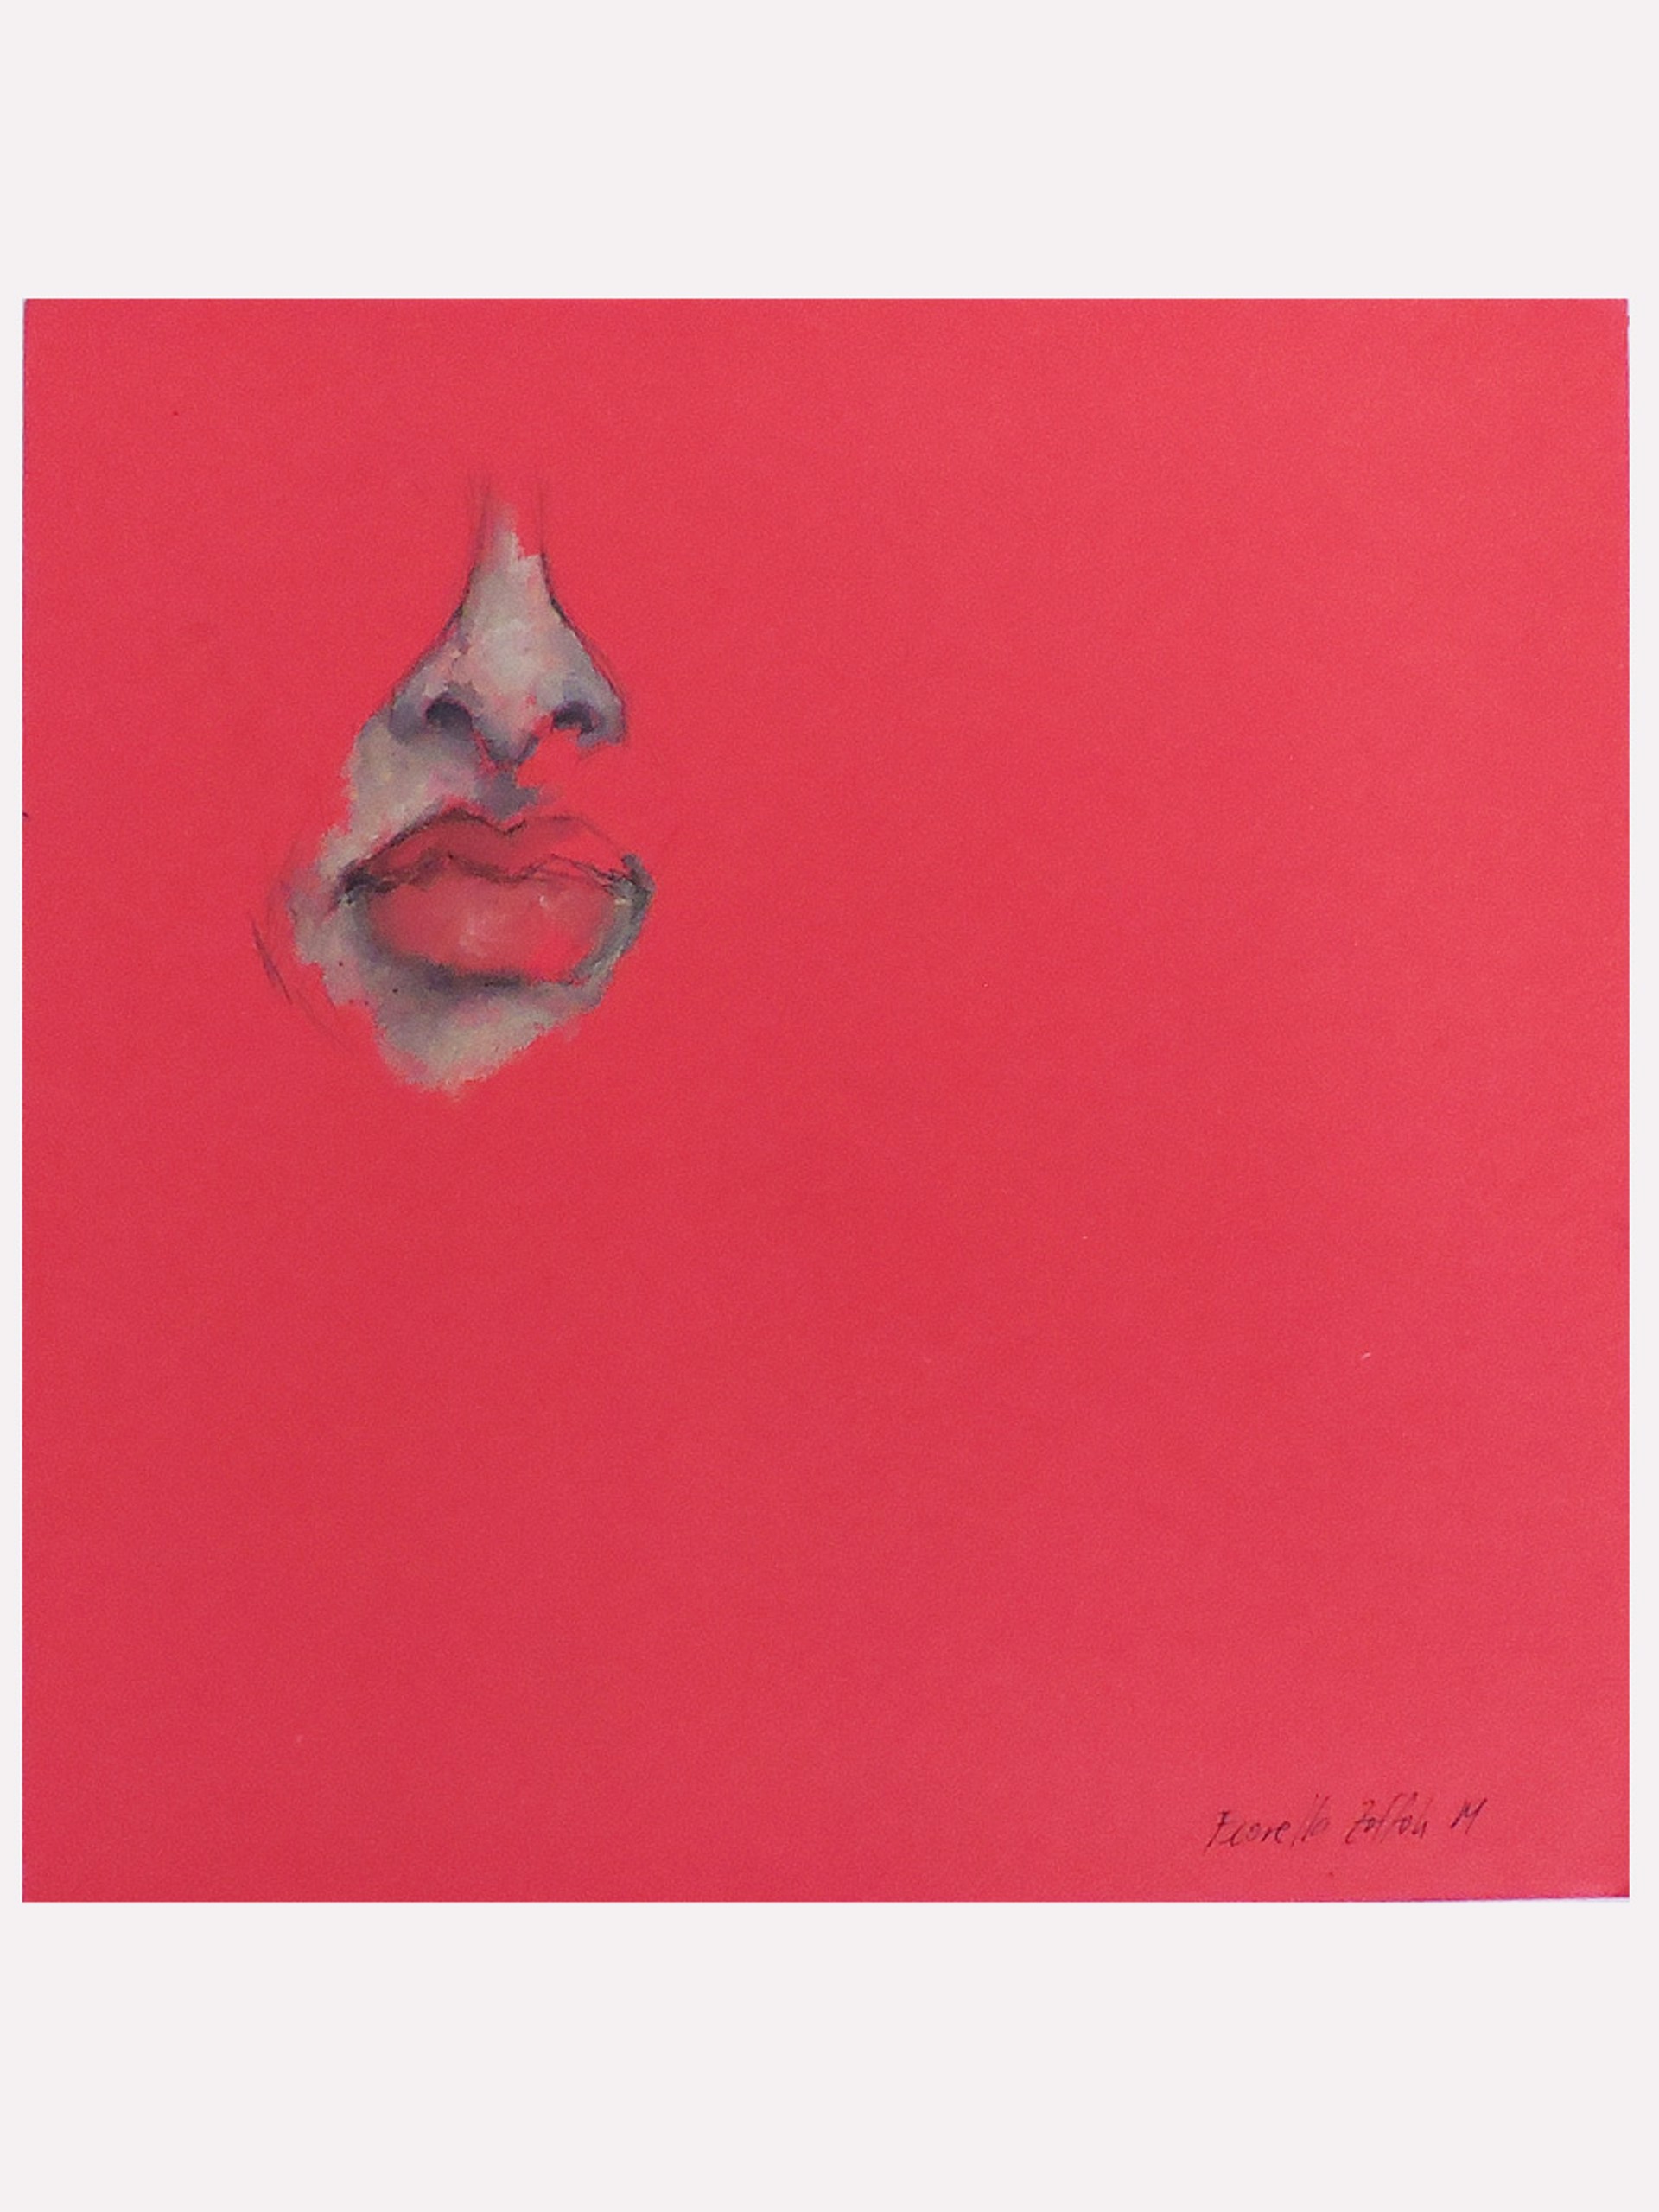 Red by Fiorella Zoffoli Momberg (Florence, Italy)